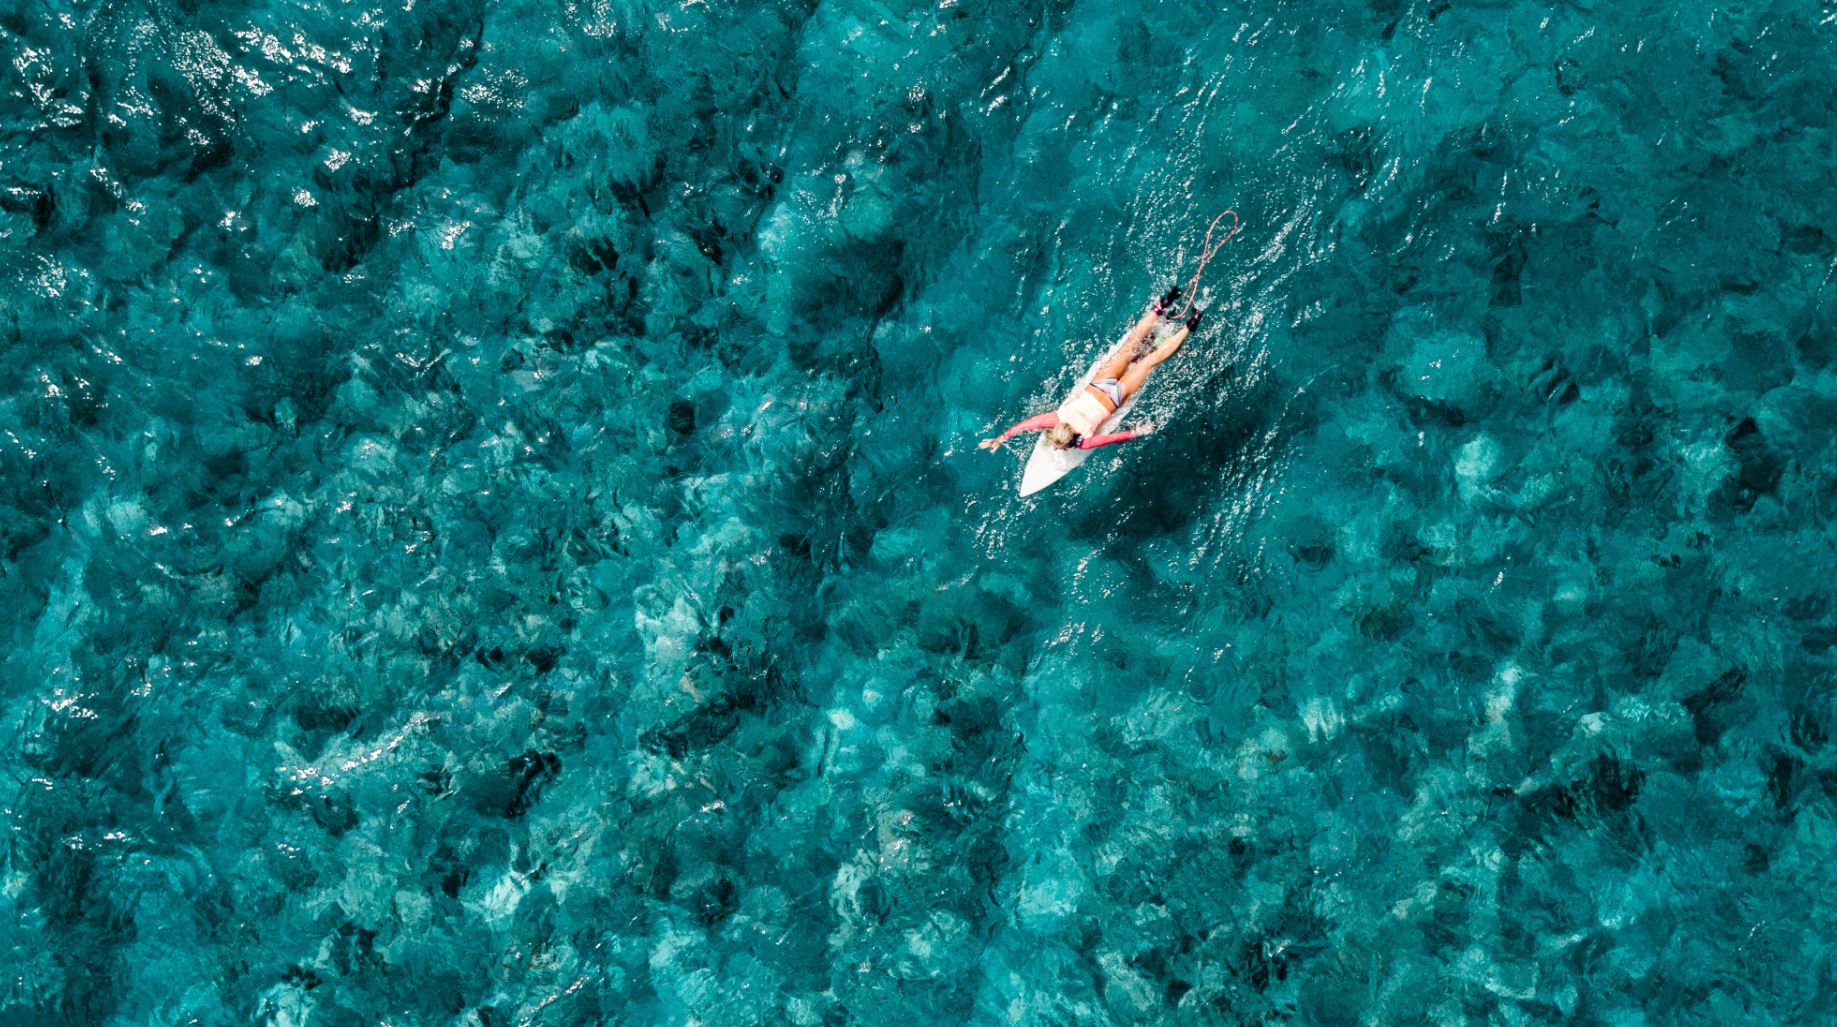 An image showing a person surfboarding in the middle of an ocean